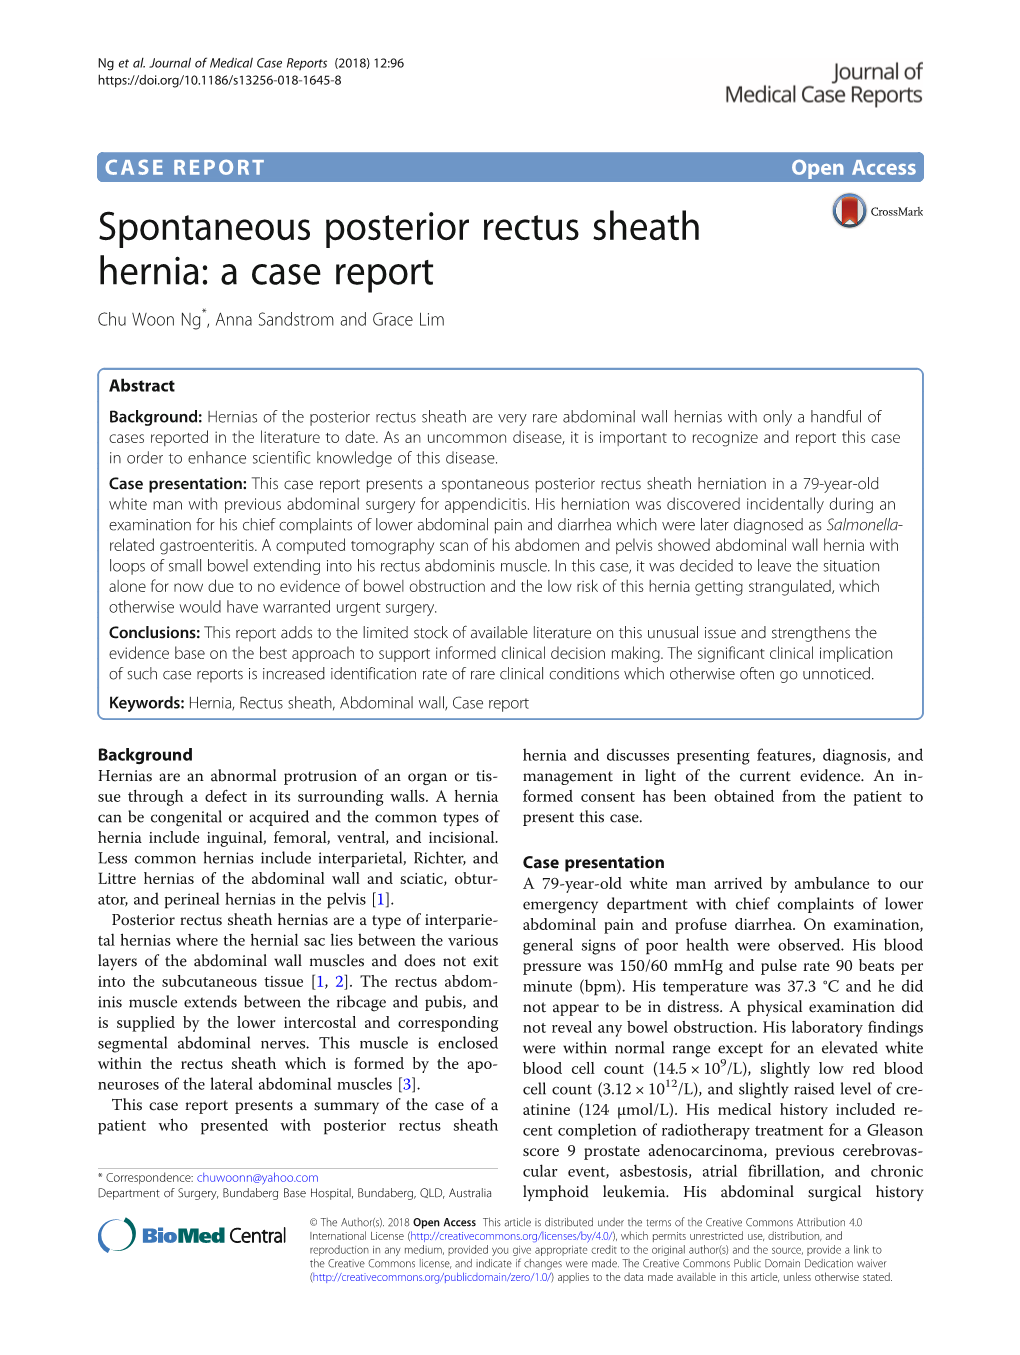 Spontaneous Posterior Rectus Sheath Hernia: a Case Report Chu Woon Ng*, Anna Sandstrom and Grace Lim